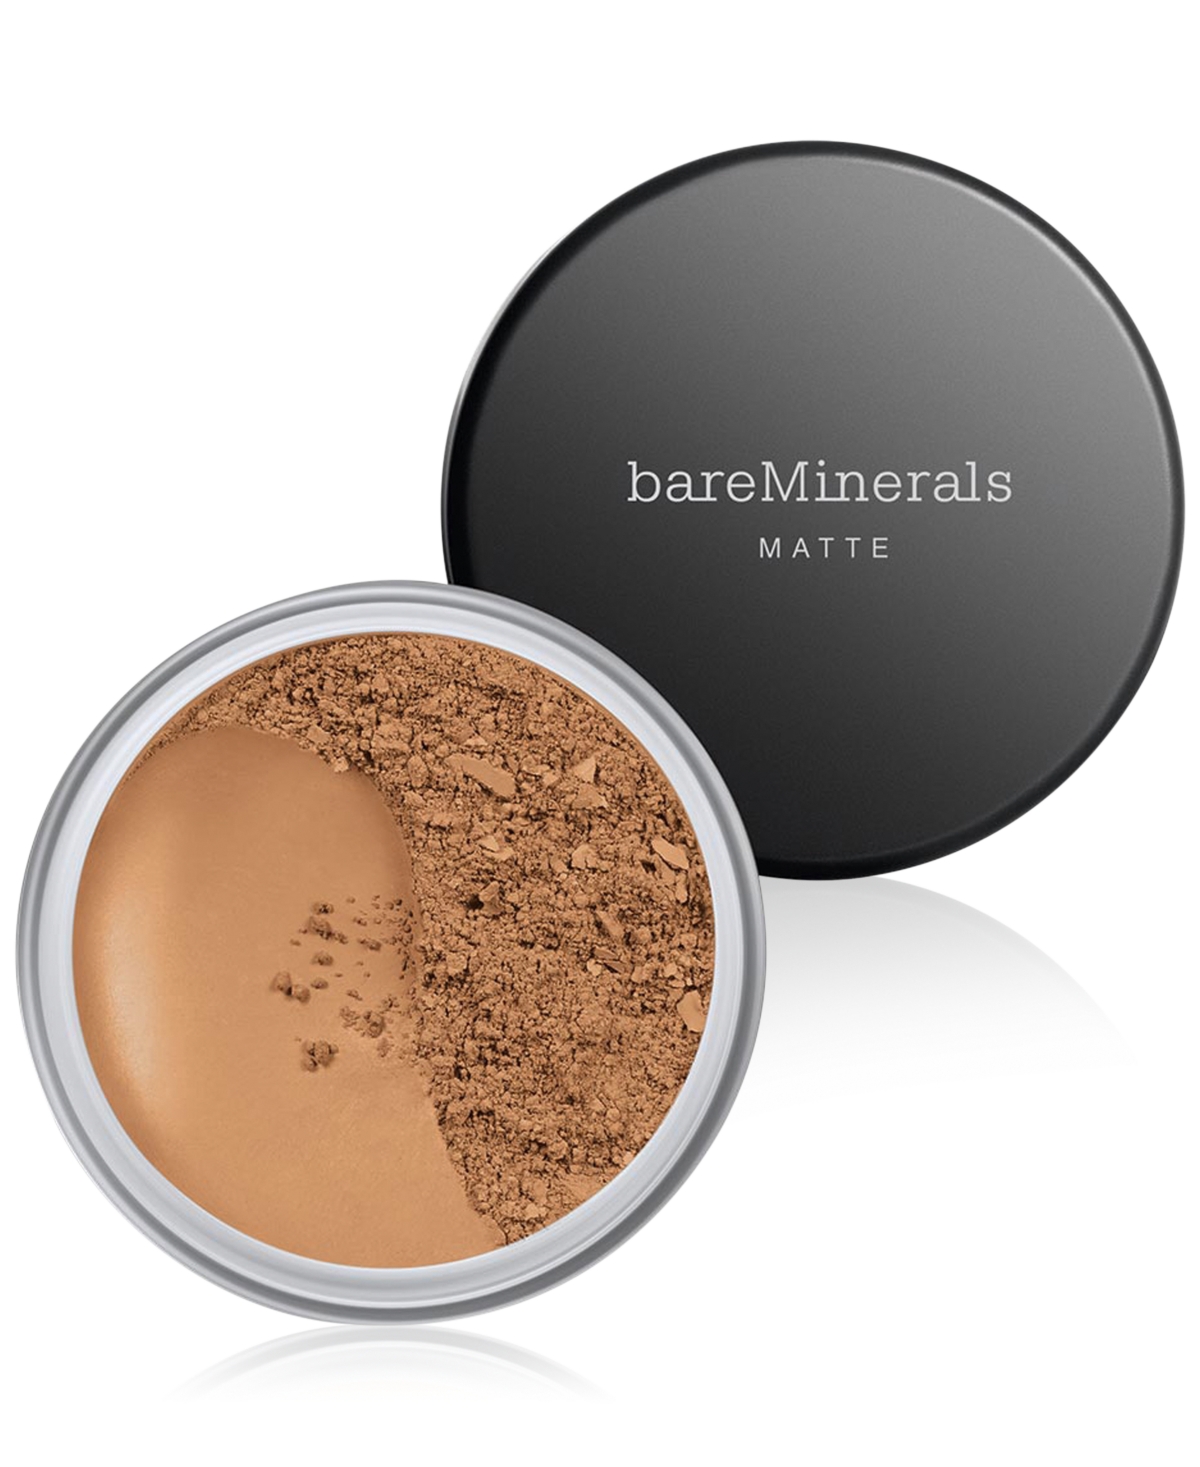 Bareminerals Matte Loose Powder Foundation Spf 15 In Neutral Tan  - For Tan Skin With Neutral